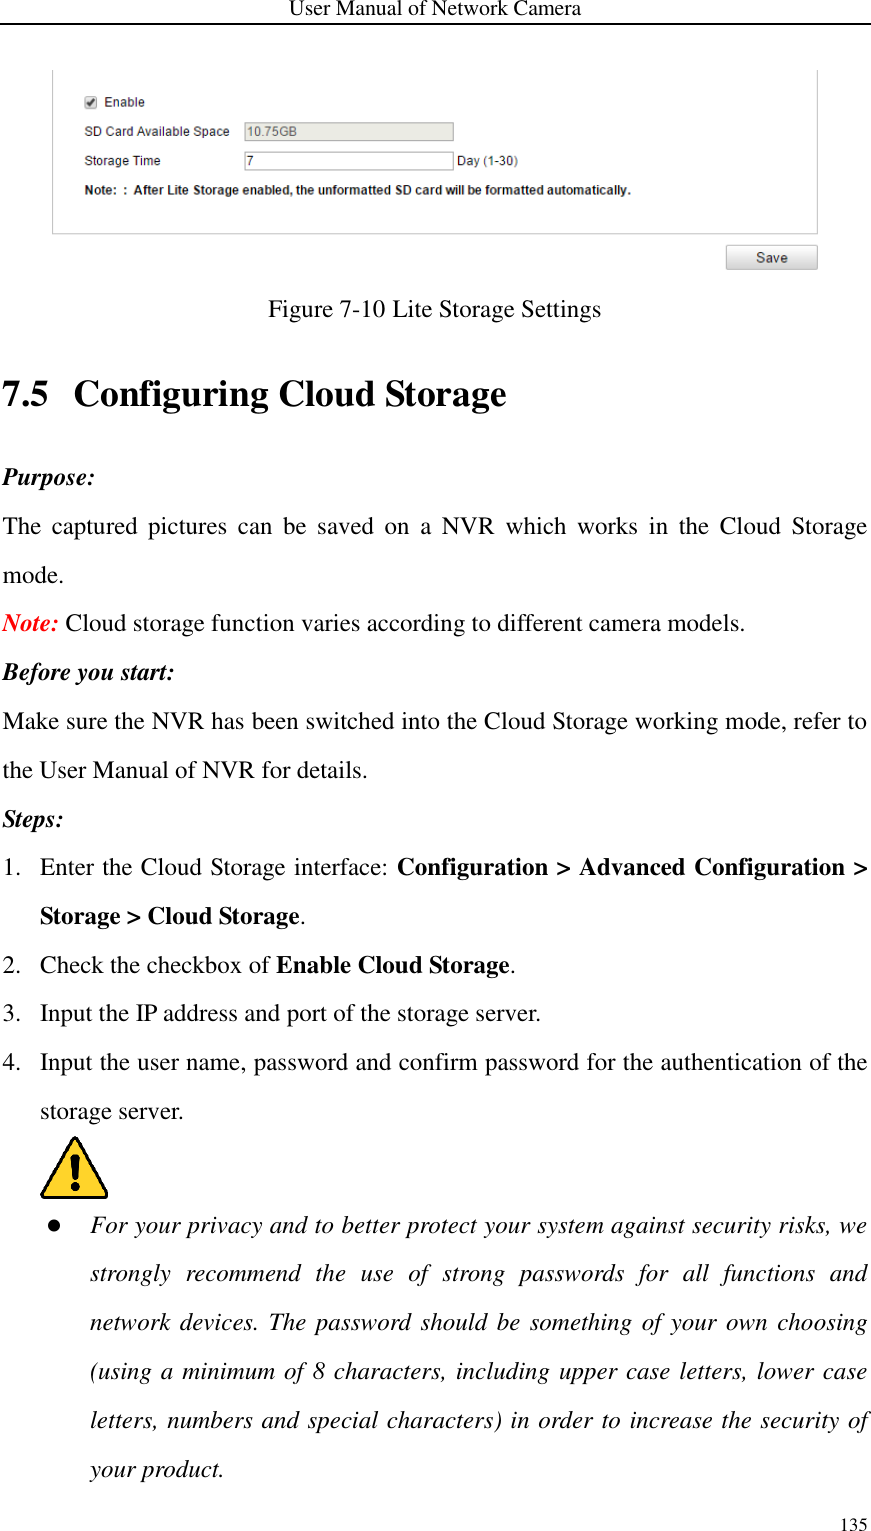 User Manual of Network Camera 135   Figure 7-10 Lite Storage Settings 7.5 Configuring Cloud Storage Purpose: The  captured  pictures  can  be  saved  on  a  NVR  which  works  in  the  Cloud  Storage mode.   Note: Cloud storage function varies according to different camera models. Before you start: Make sure the NVR has been switched into the Cloud Storage working mode, refer to the User Manual of NVR for details. Steps: 1. Enter the Cloud Storage interface: Configuration &gt; Advanced Configuration &gt; Storage &gt; Cloud Storage. 2. Check the checkbox of Enable Cloud Storage.   3. Input the IP address and port of the storage server. 4. Input the user name, password and confirm password for the authentication of the storage server.     For your privacy and to better protect your system against security risks, we strongly  recommend  the  use  of  strong  passwords  for  all  functions  and network devices. The password should be something of your own choosing (using a minimum of 8 characters, including upper case letters, lower case letters, numbers and special characters) in order to increase the security of your product. 